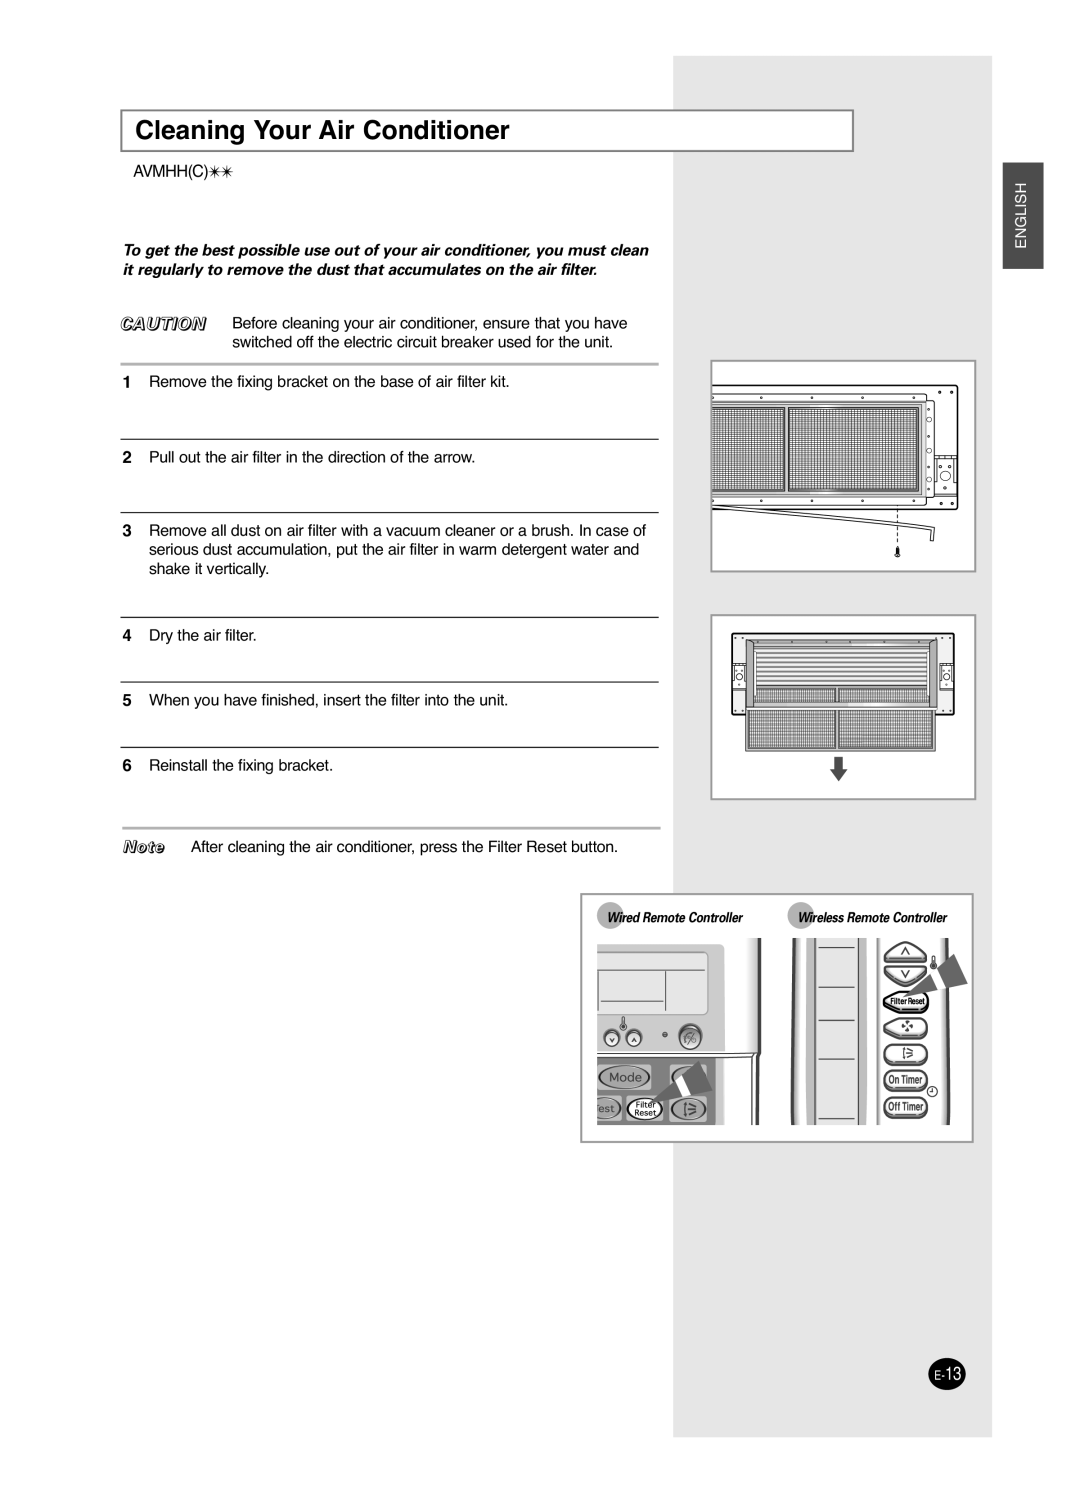 Samsung AVMDH(C) user manual Cleaning Your Air Conditioner, Avmhhc, English 